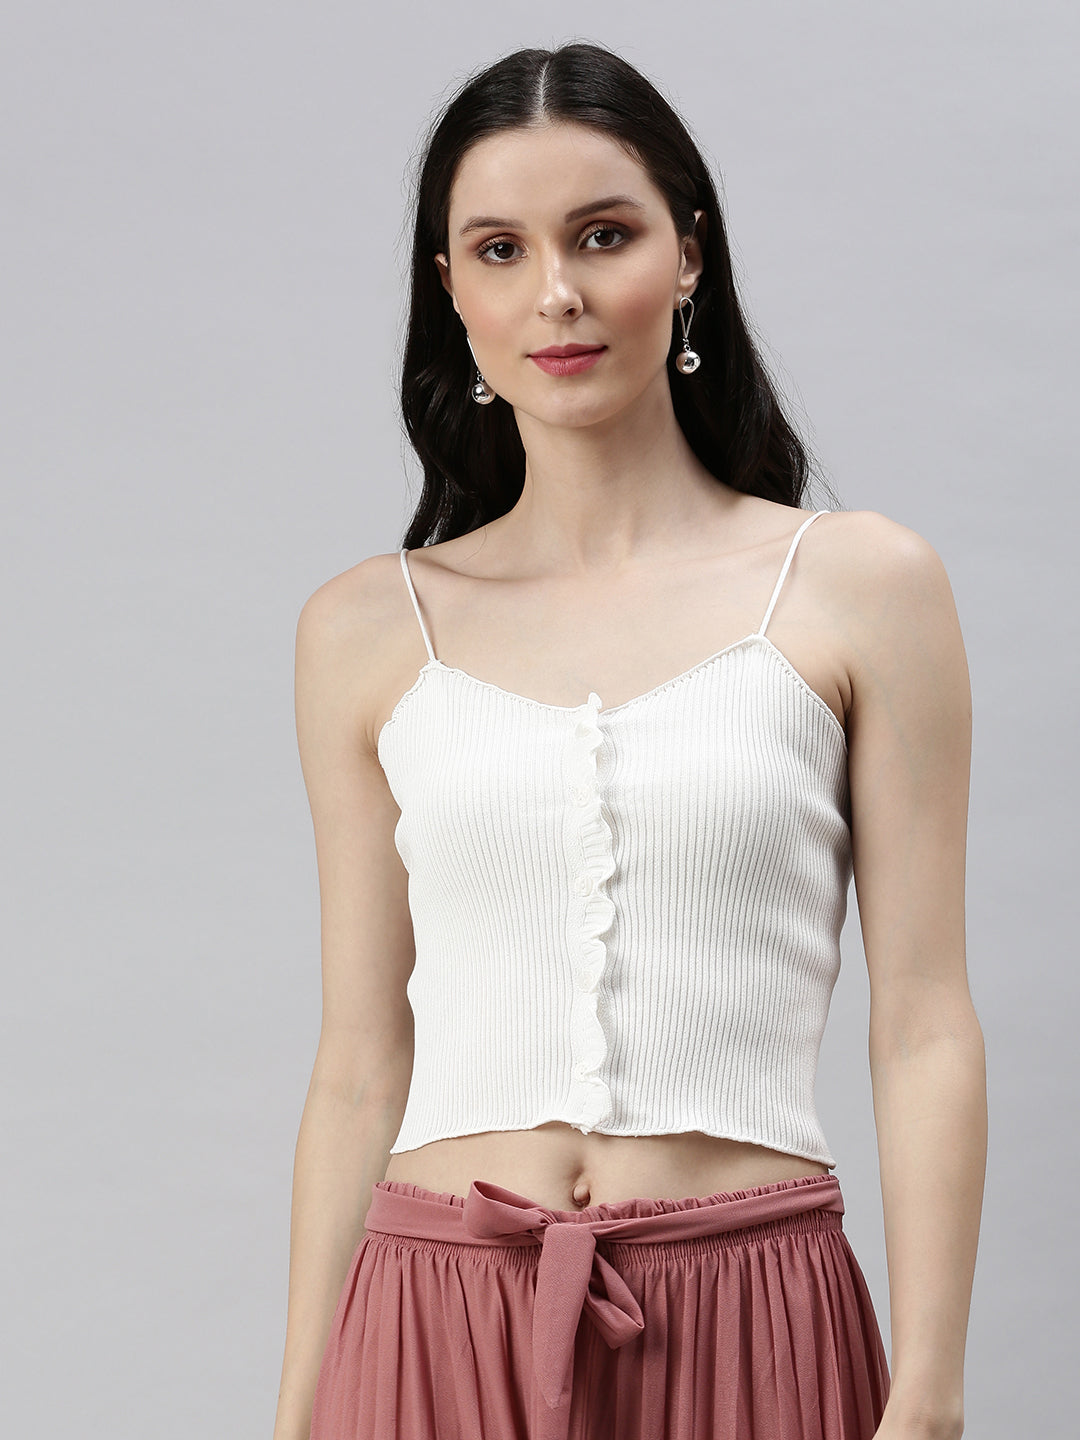 Women Shoulder Straps Solid White Fitted Top